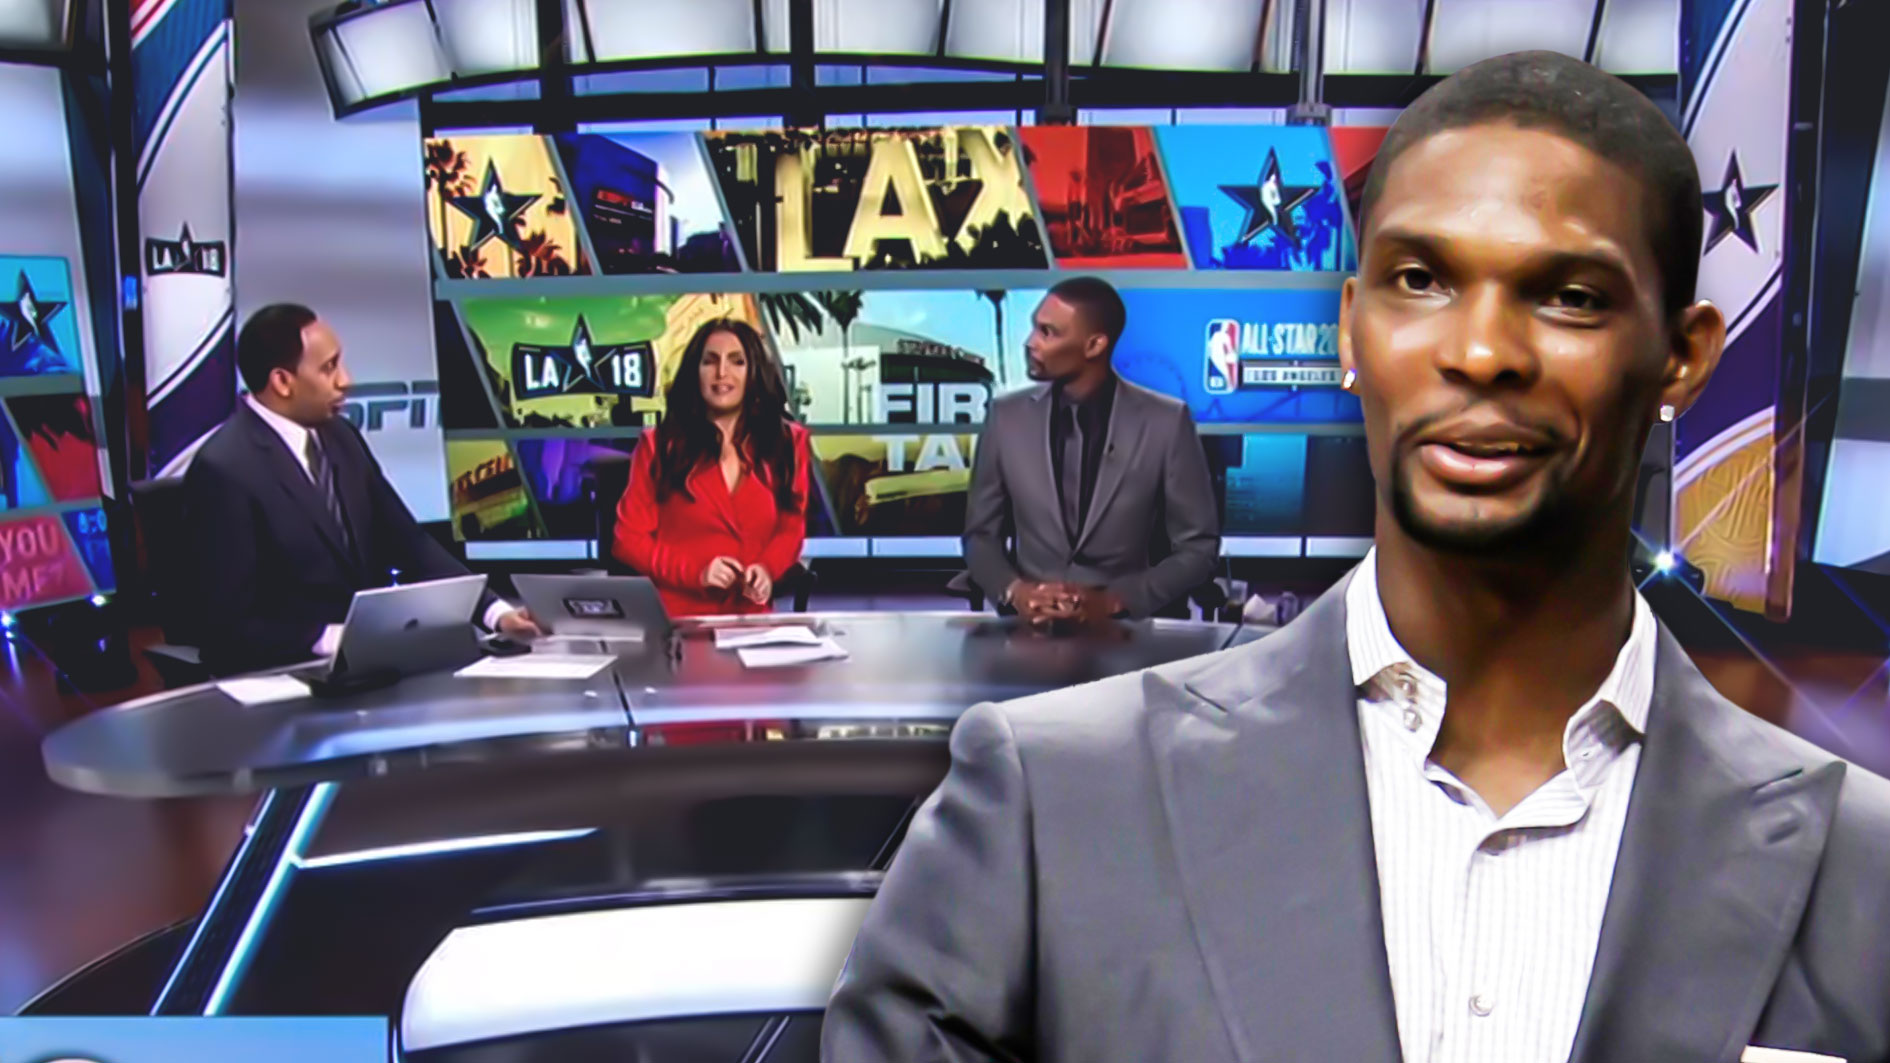 Chris-Bosh-names-the-team-he-wants-to-join-says-he_ll-take-best-deal